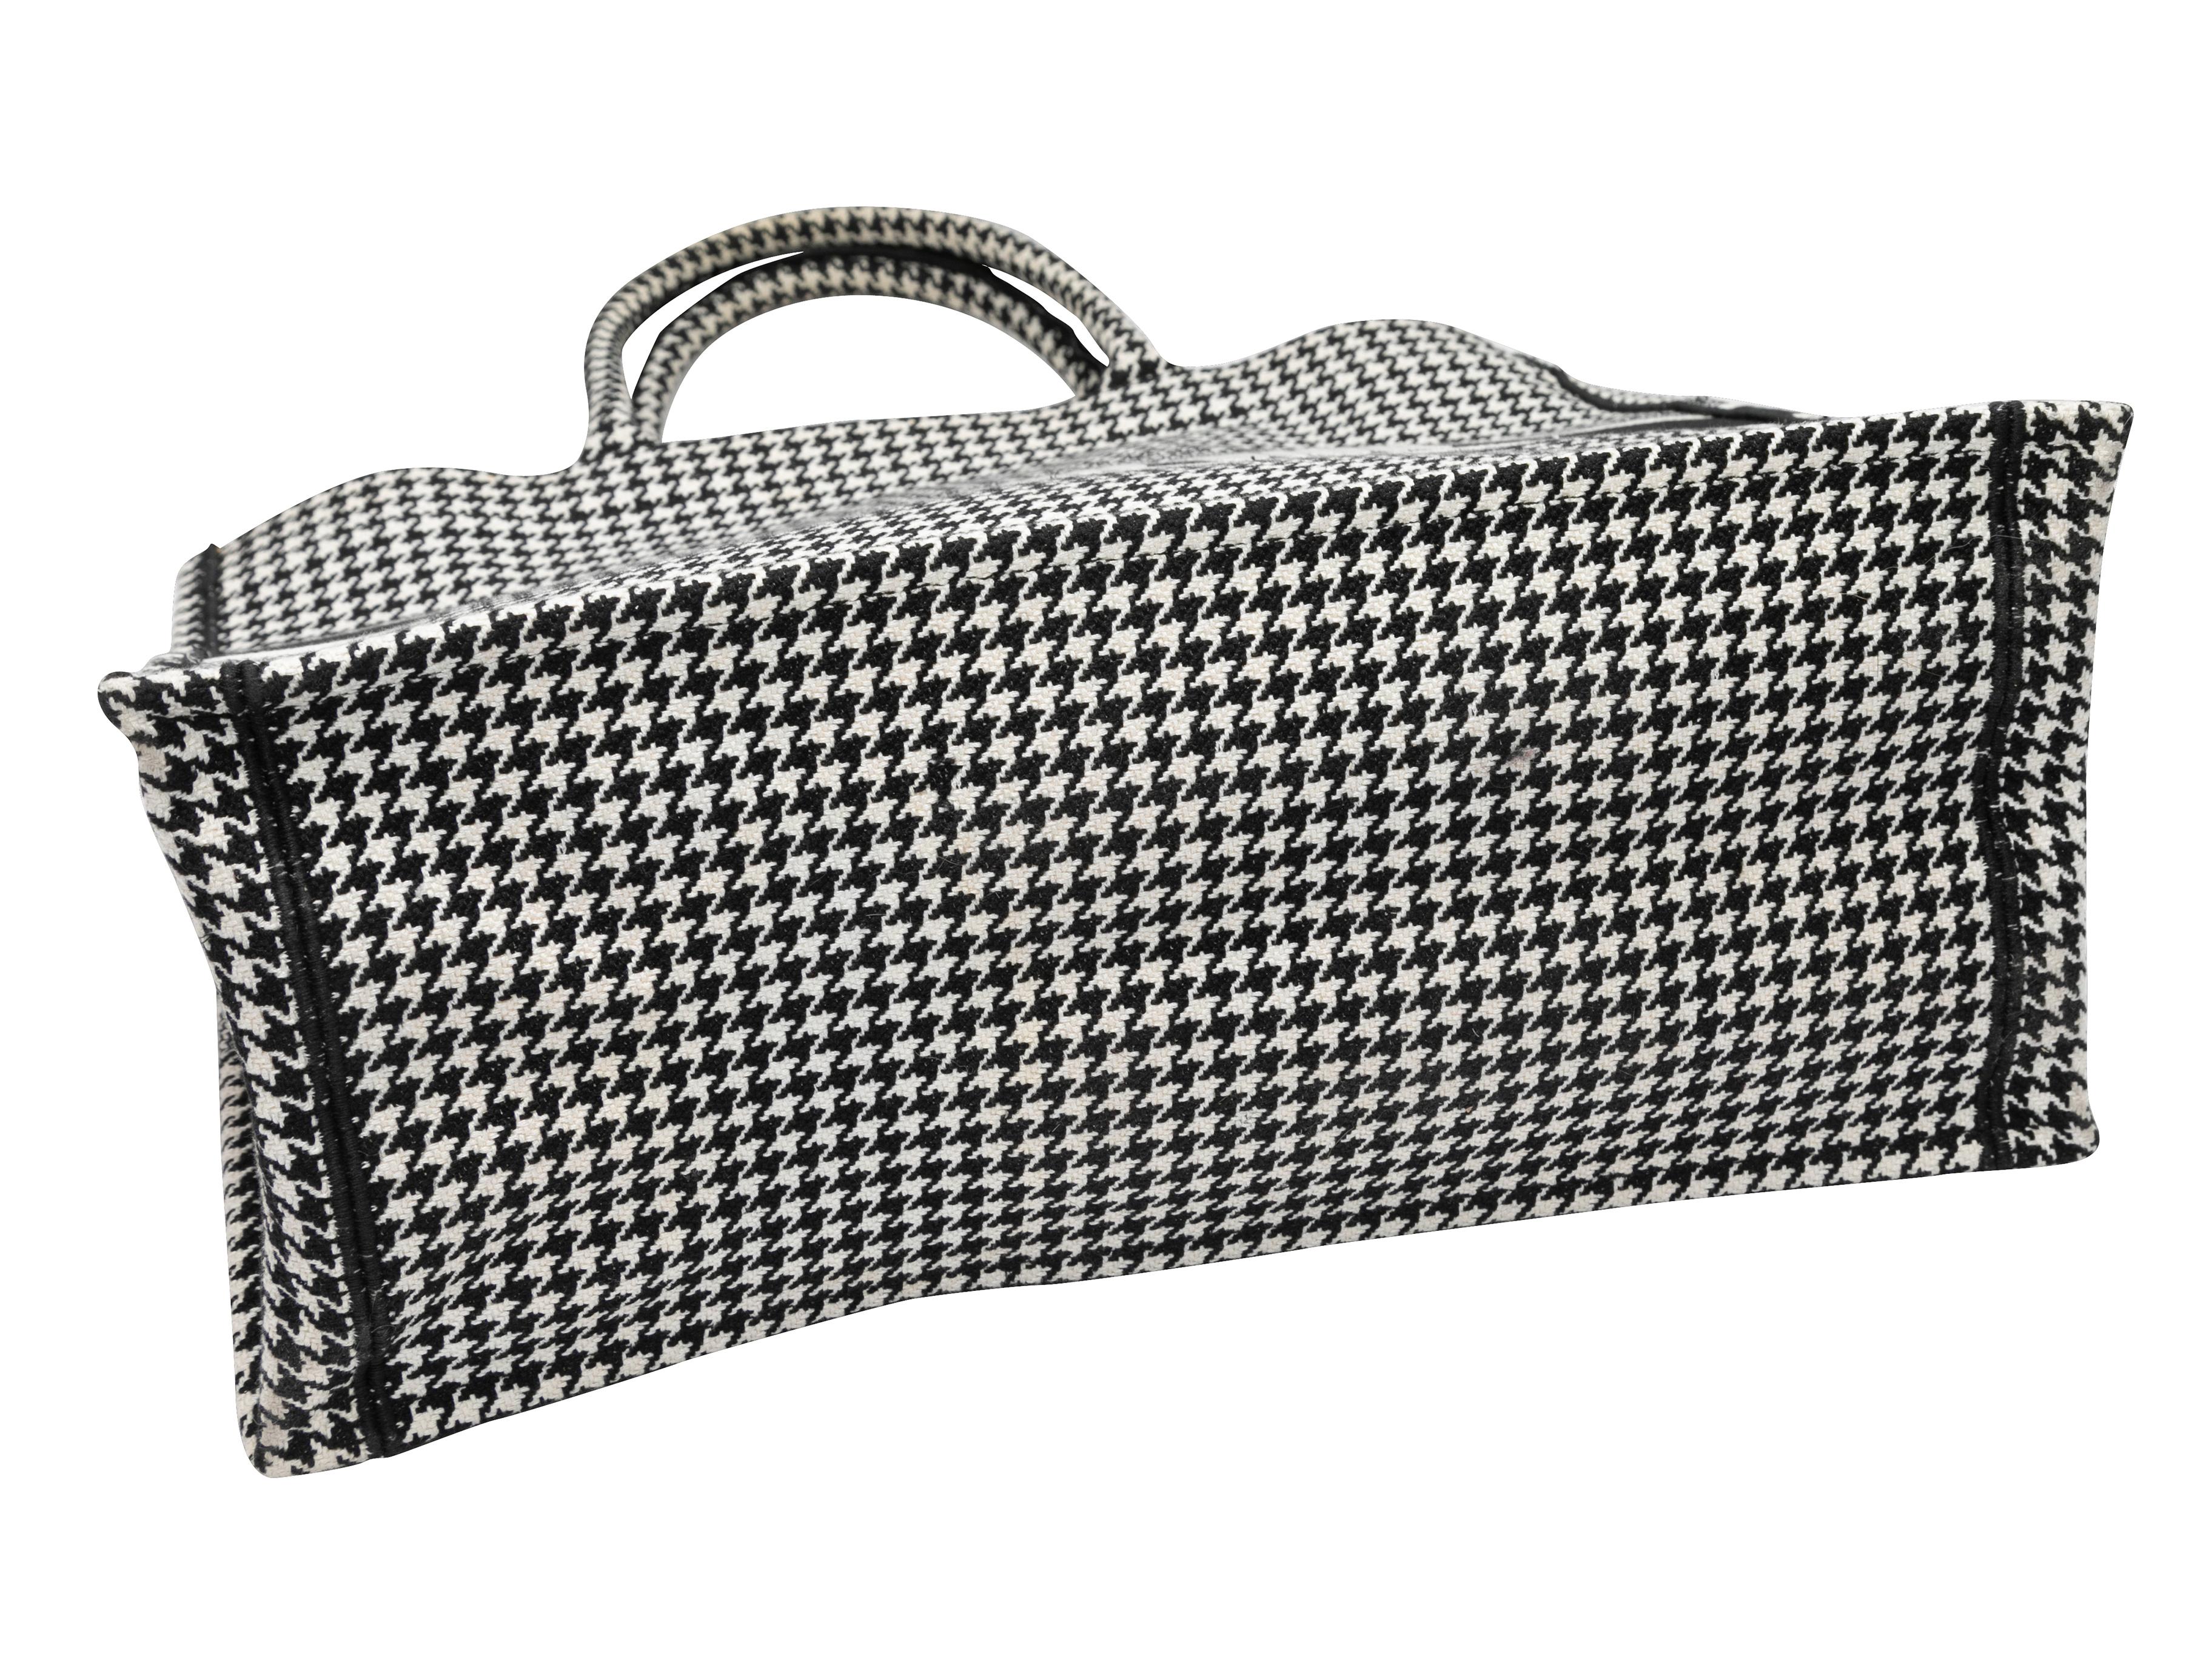 Women's Black & White Christian Dior Medium Houndstooth Book Tote For Sale